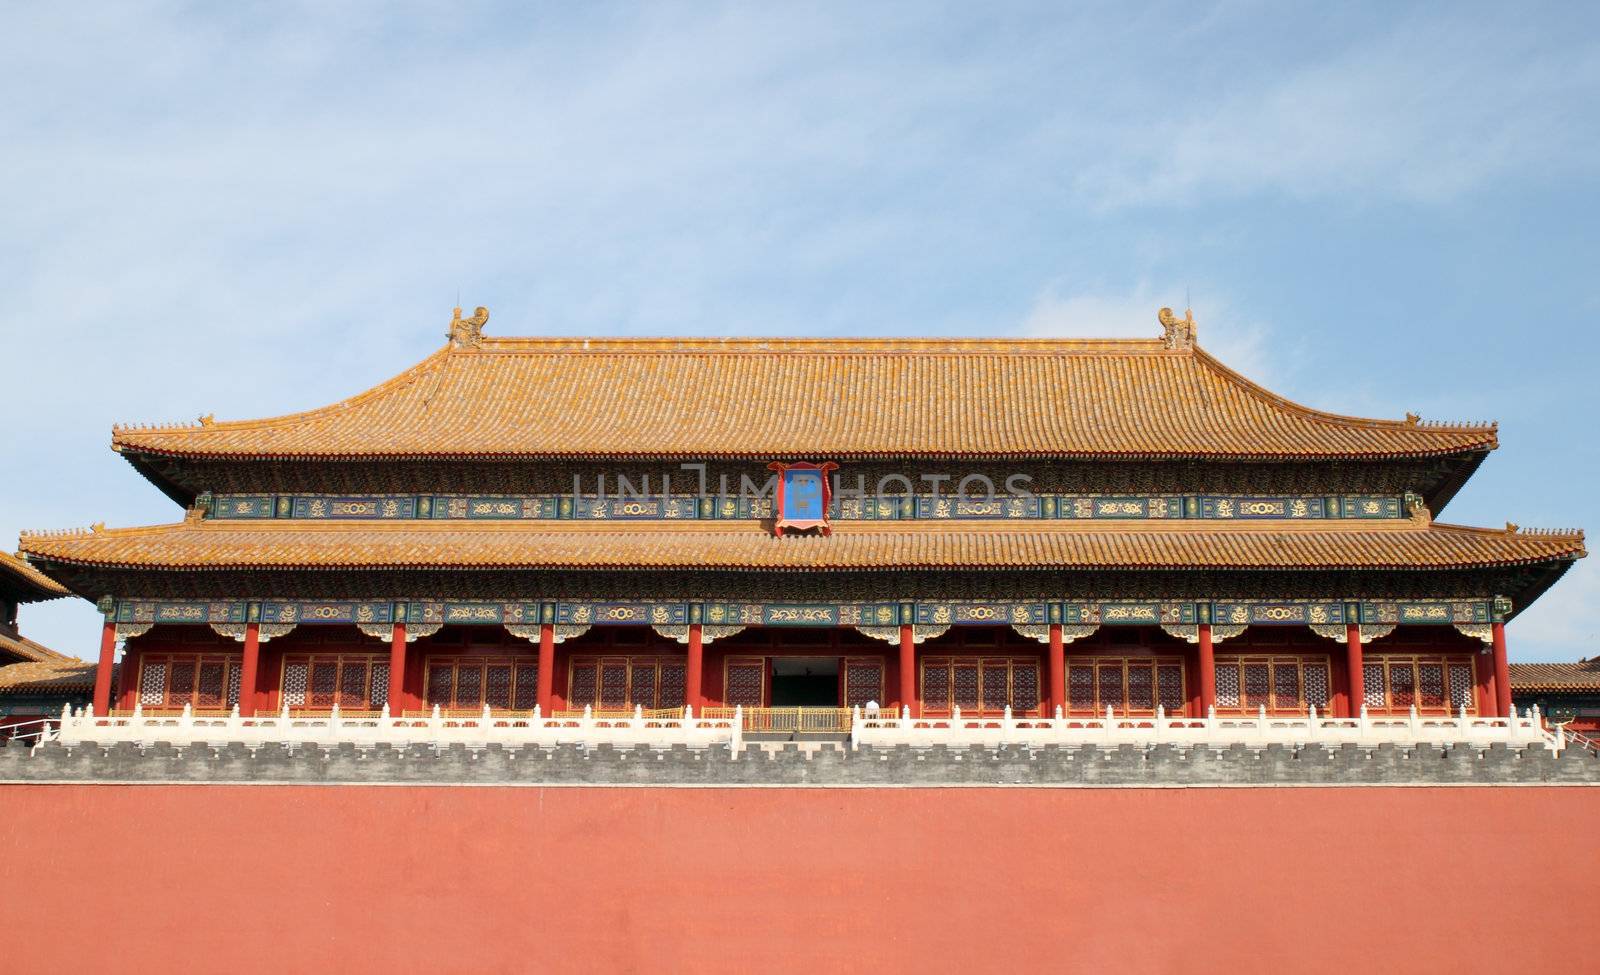 Palace Forbidden city in Beijing, China by geargodz